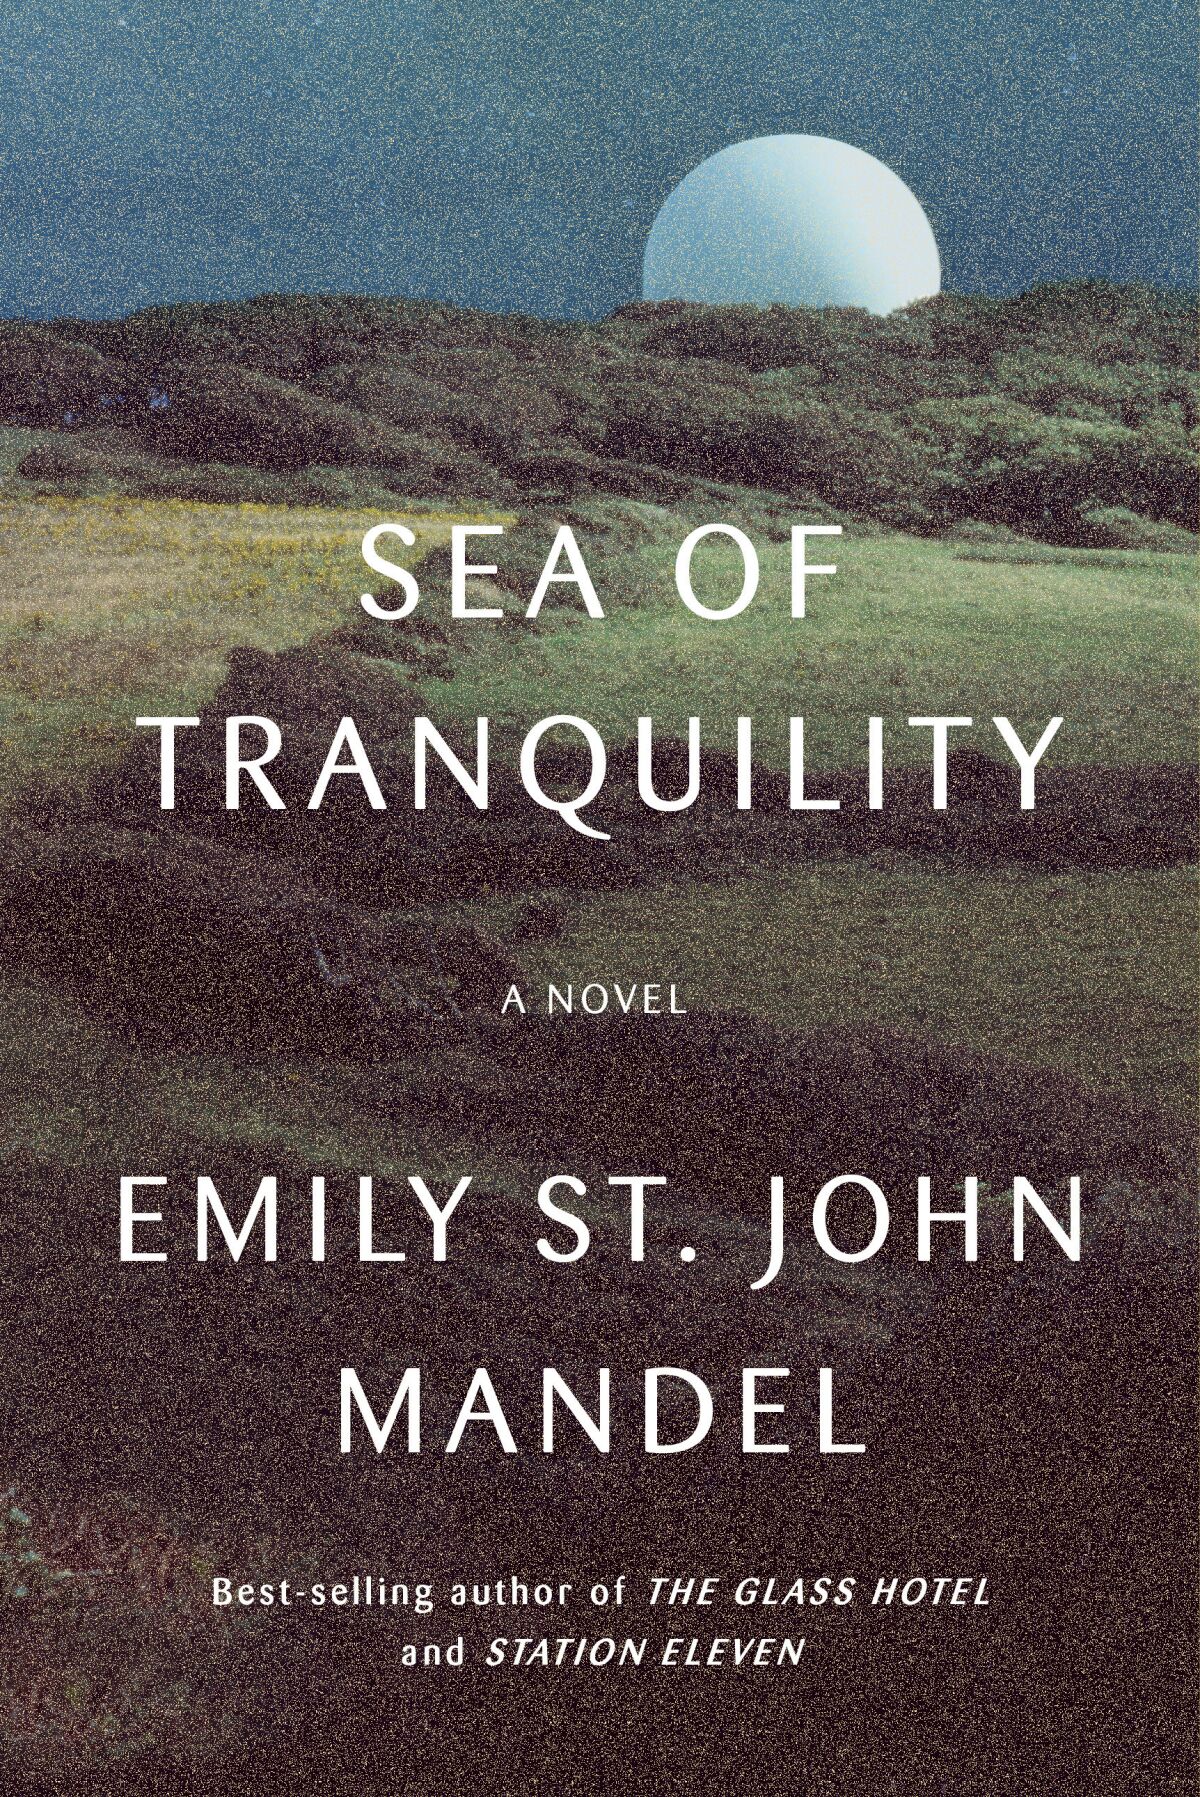 This cover image released by Knopf shows "Sea of Tranquility" by Emily St. John Mandel. (Knopf via AP)